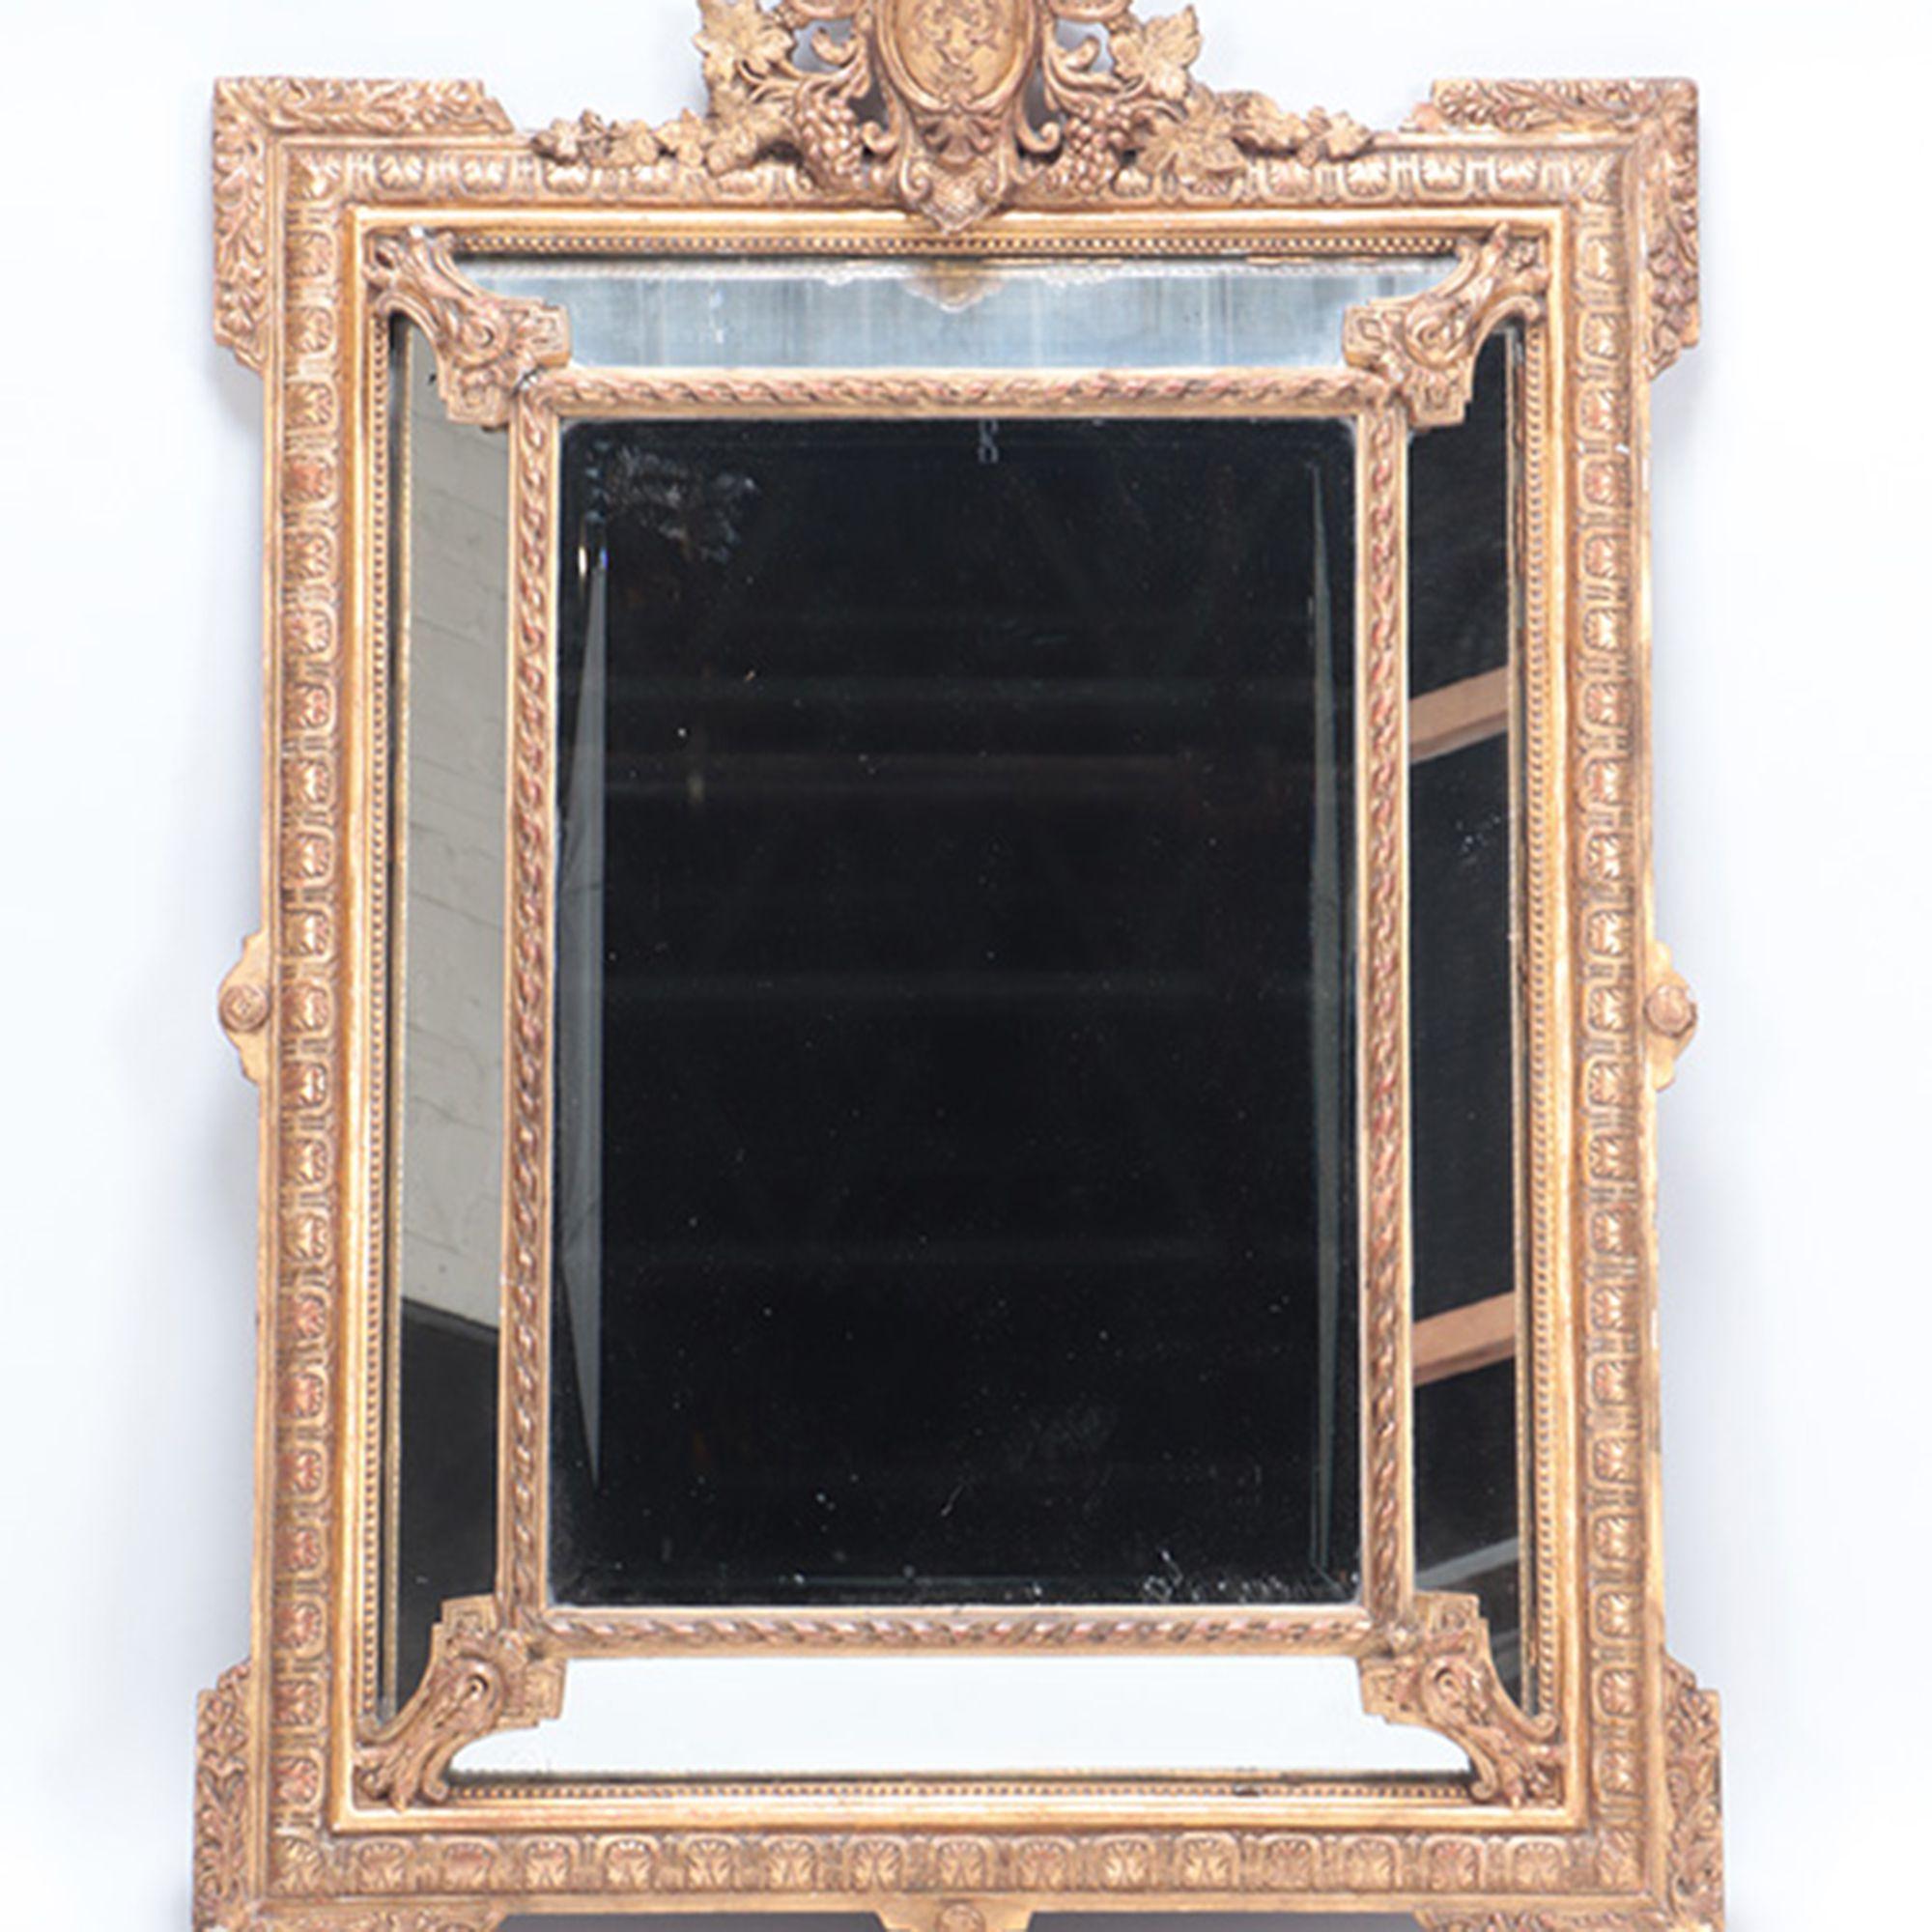 A French gilt wood and gesso mirror with mirrored border, circa 1900.